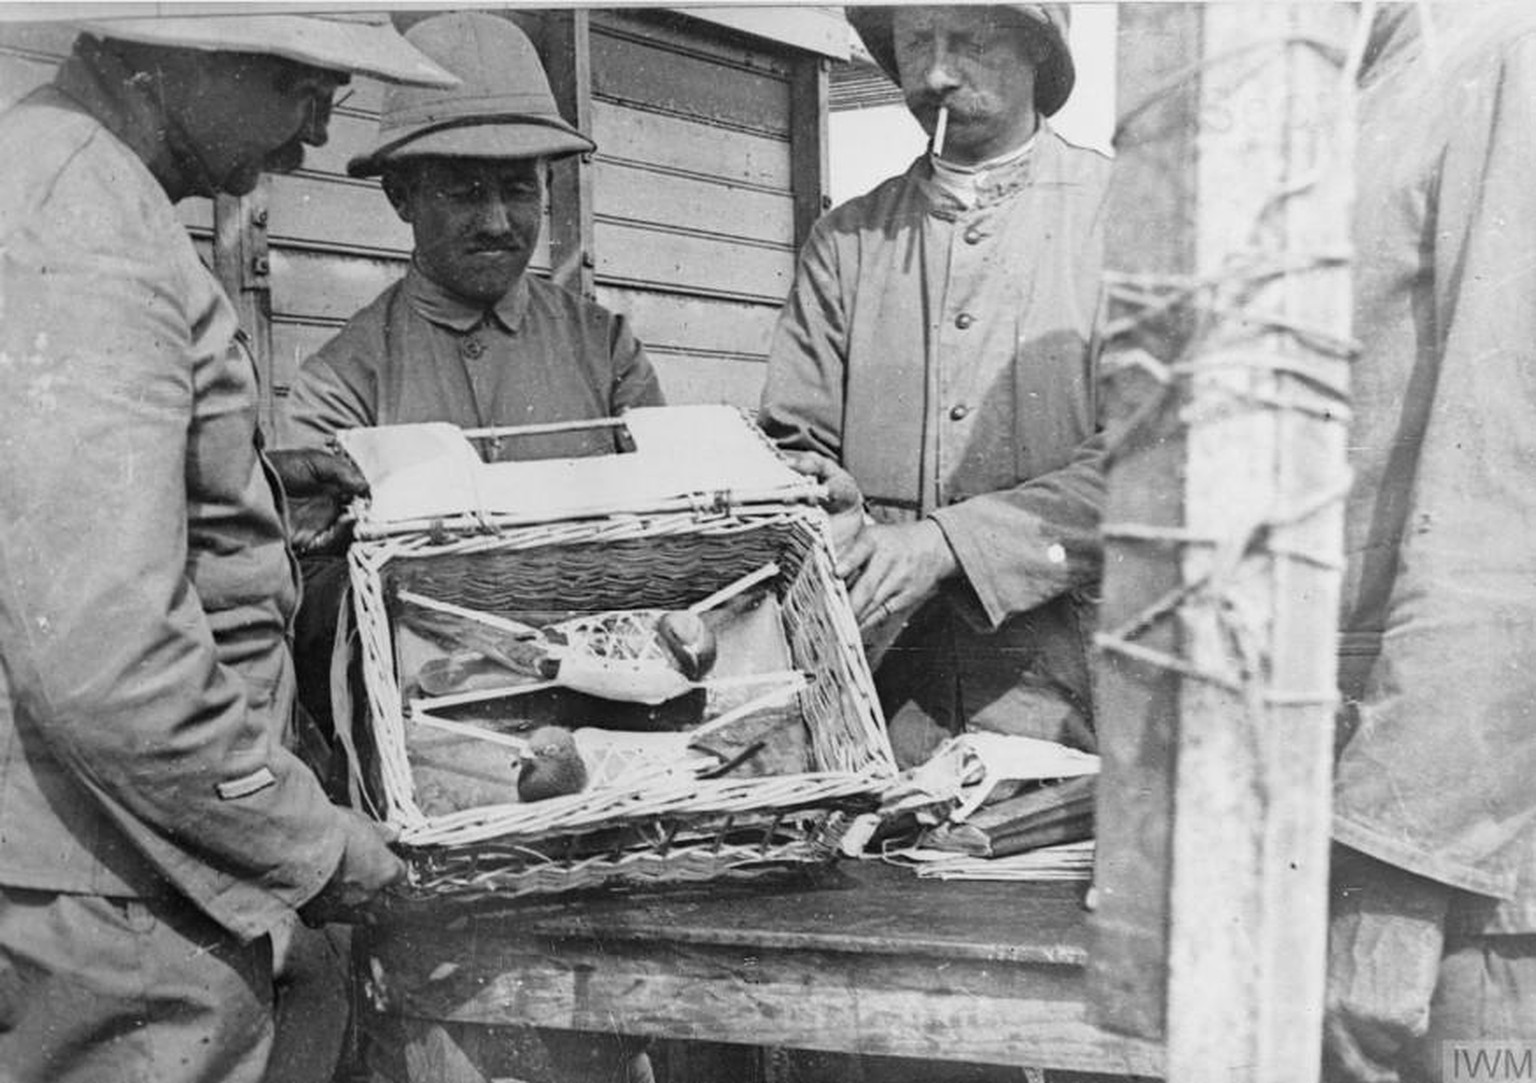 French troops with two carrier pigeons strapped in their travelling basket.
https://www.iwm.org.uk/collections/item/object/205194800